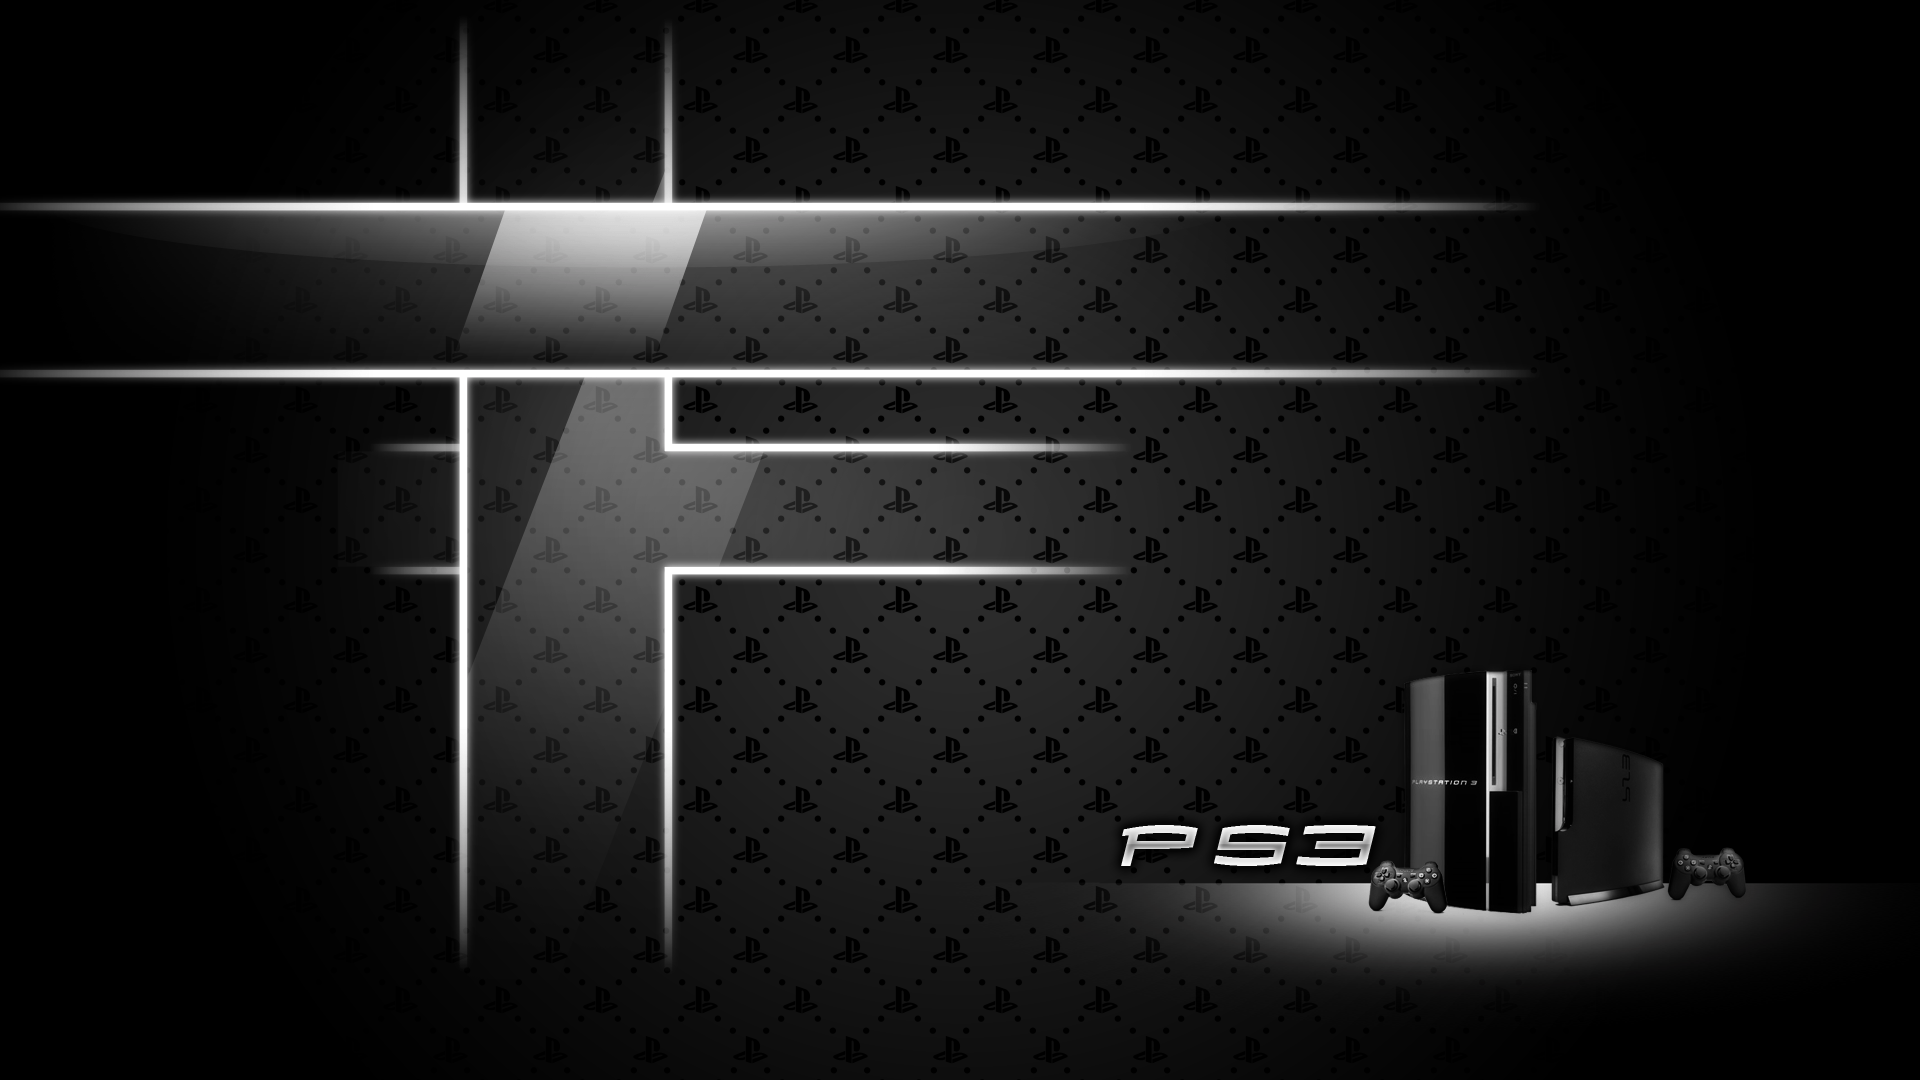 PS3 Background Wallpaper